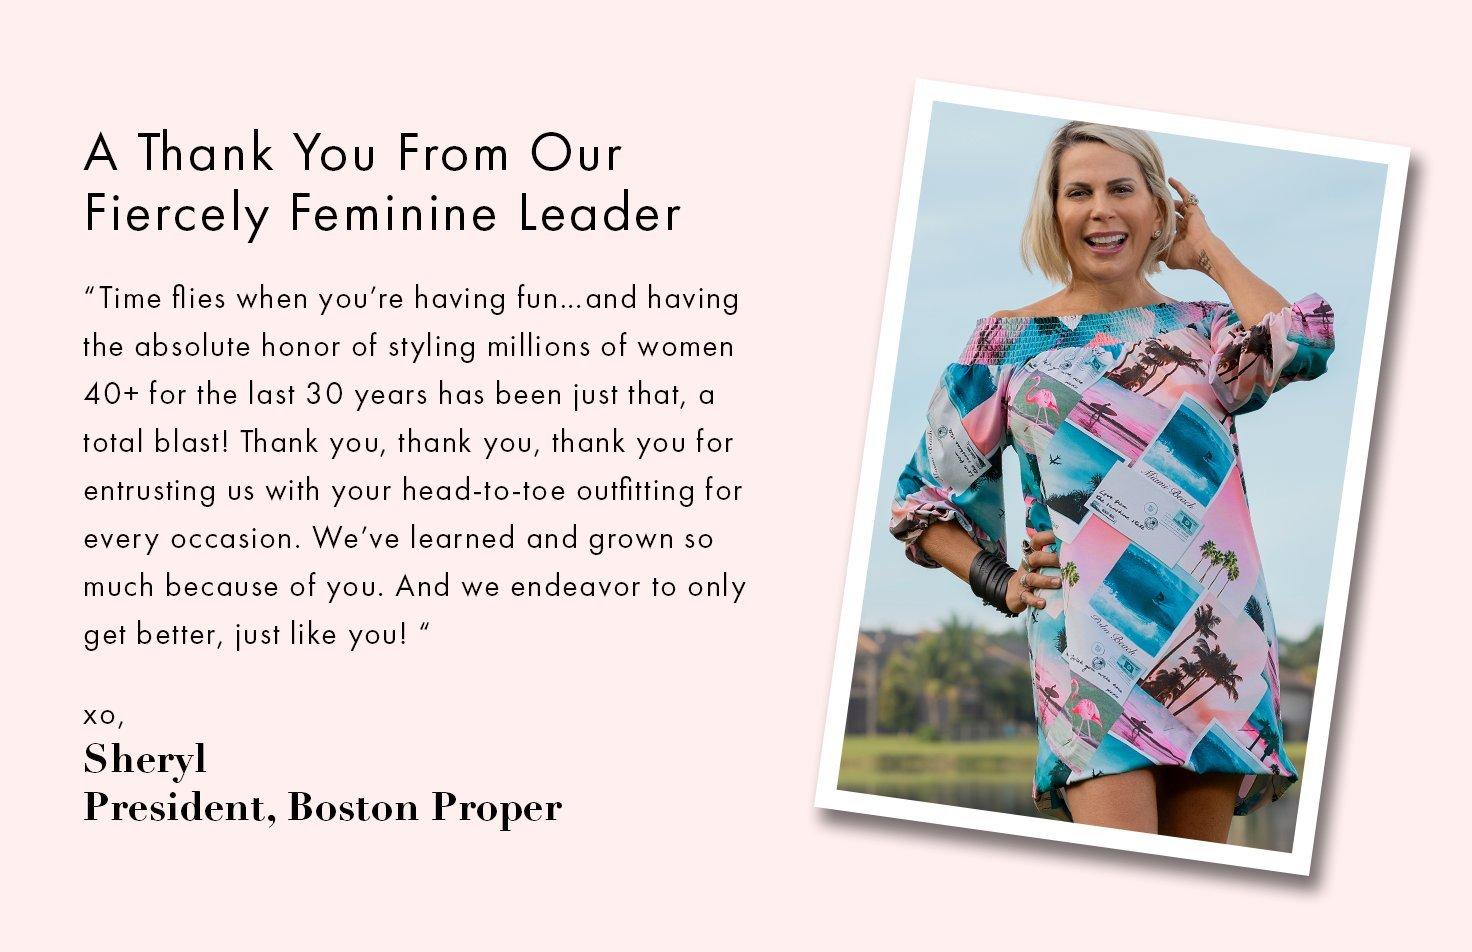 A Thank You From Our Fiercely Feminine Leader